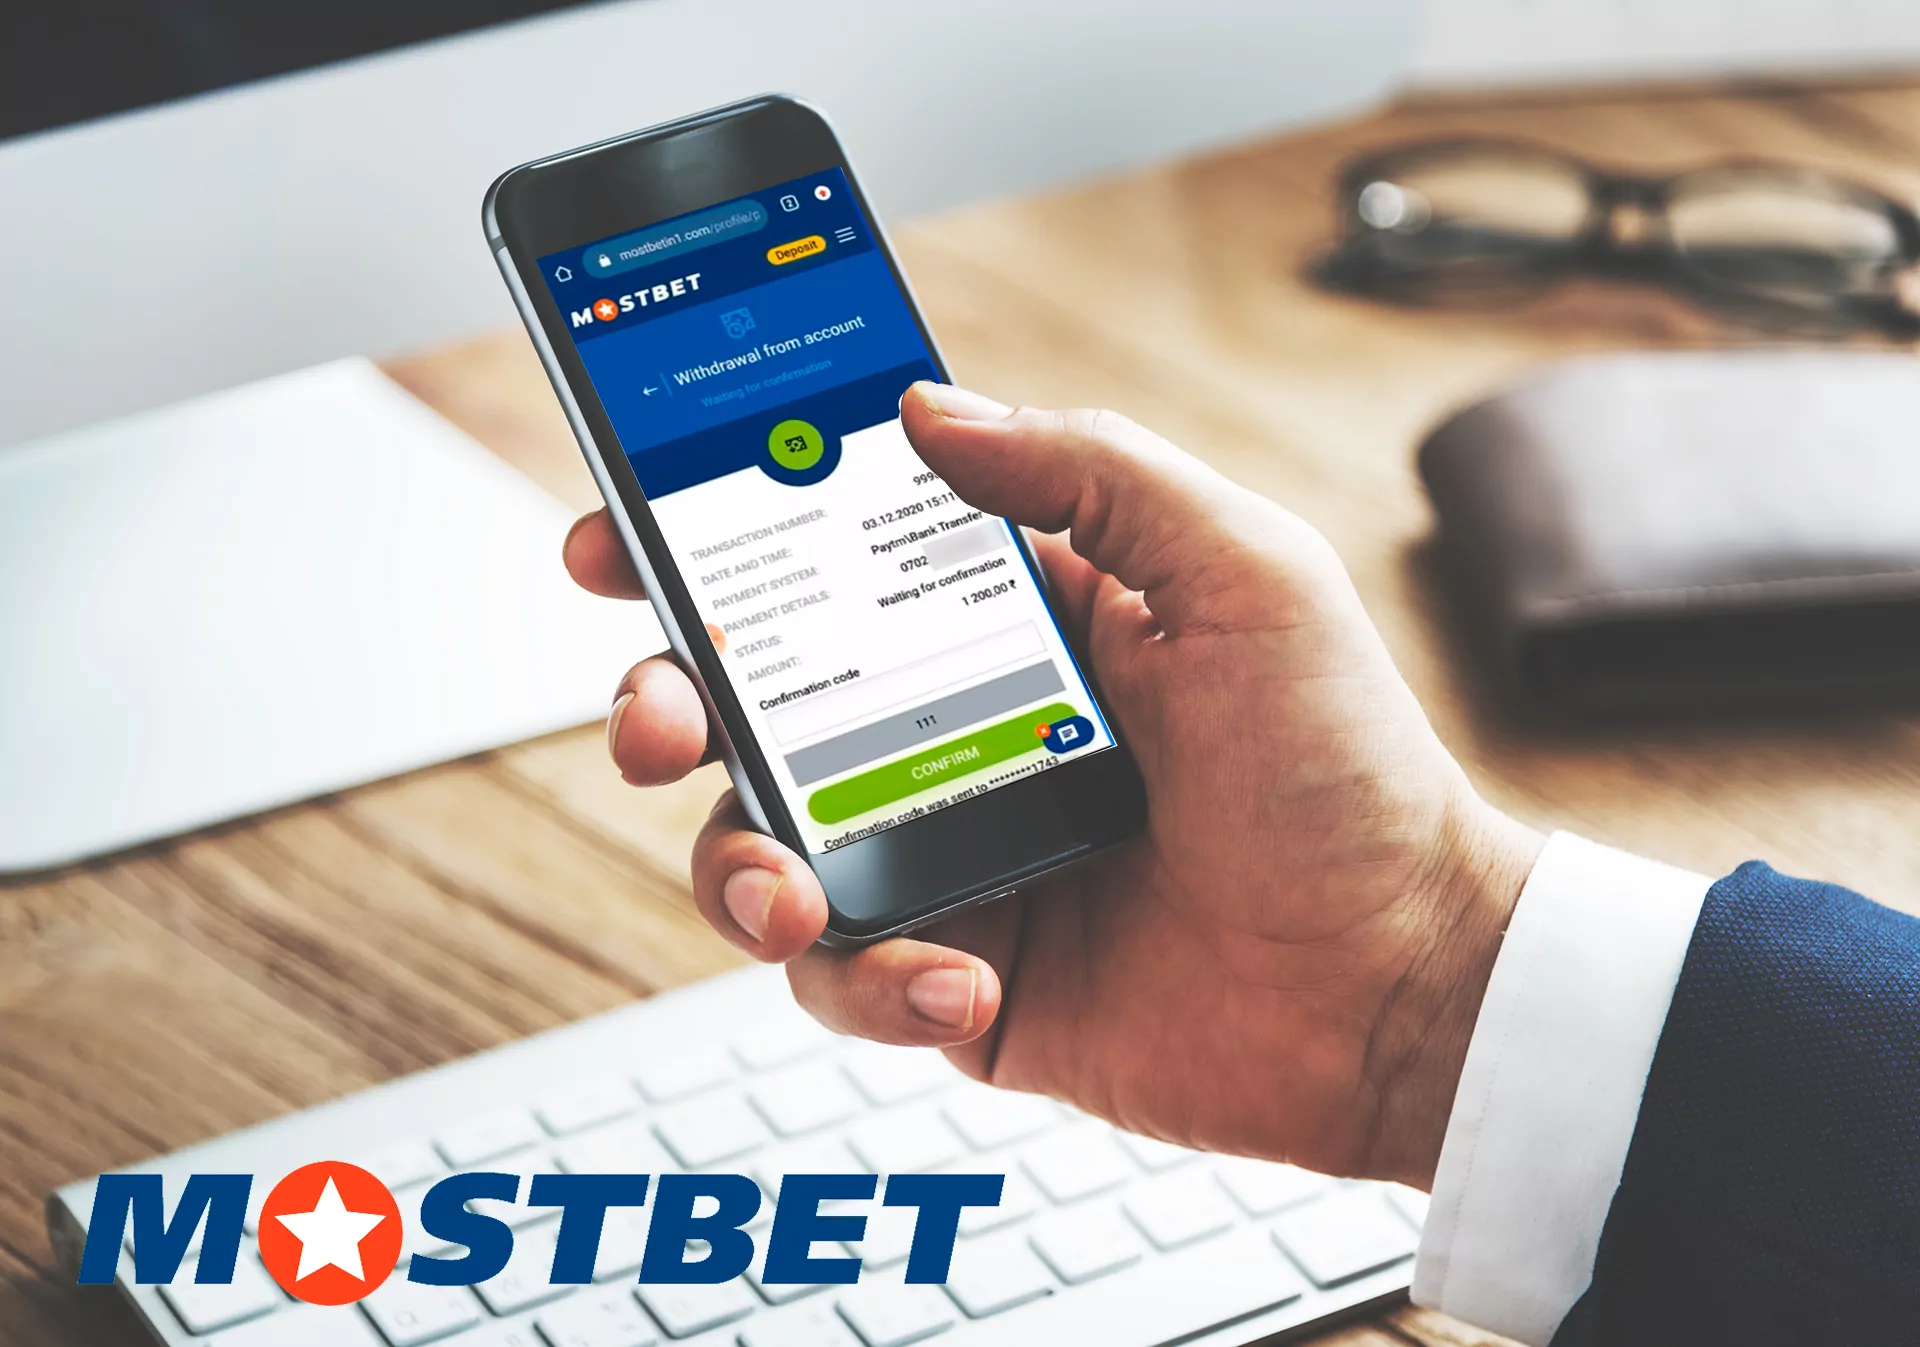 The withdrawal from Mostbet can take some time.